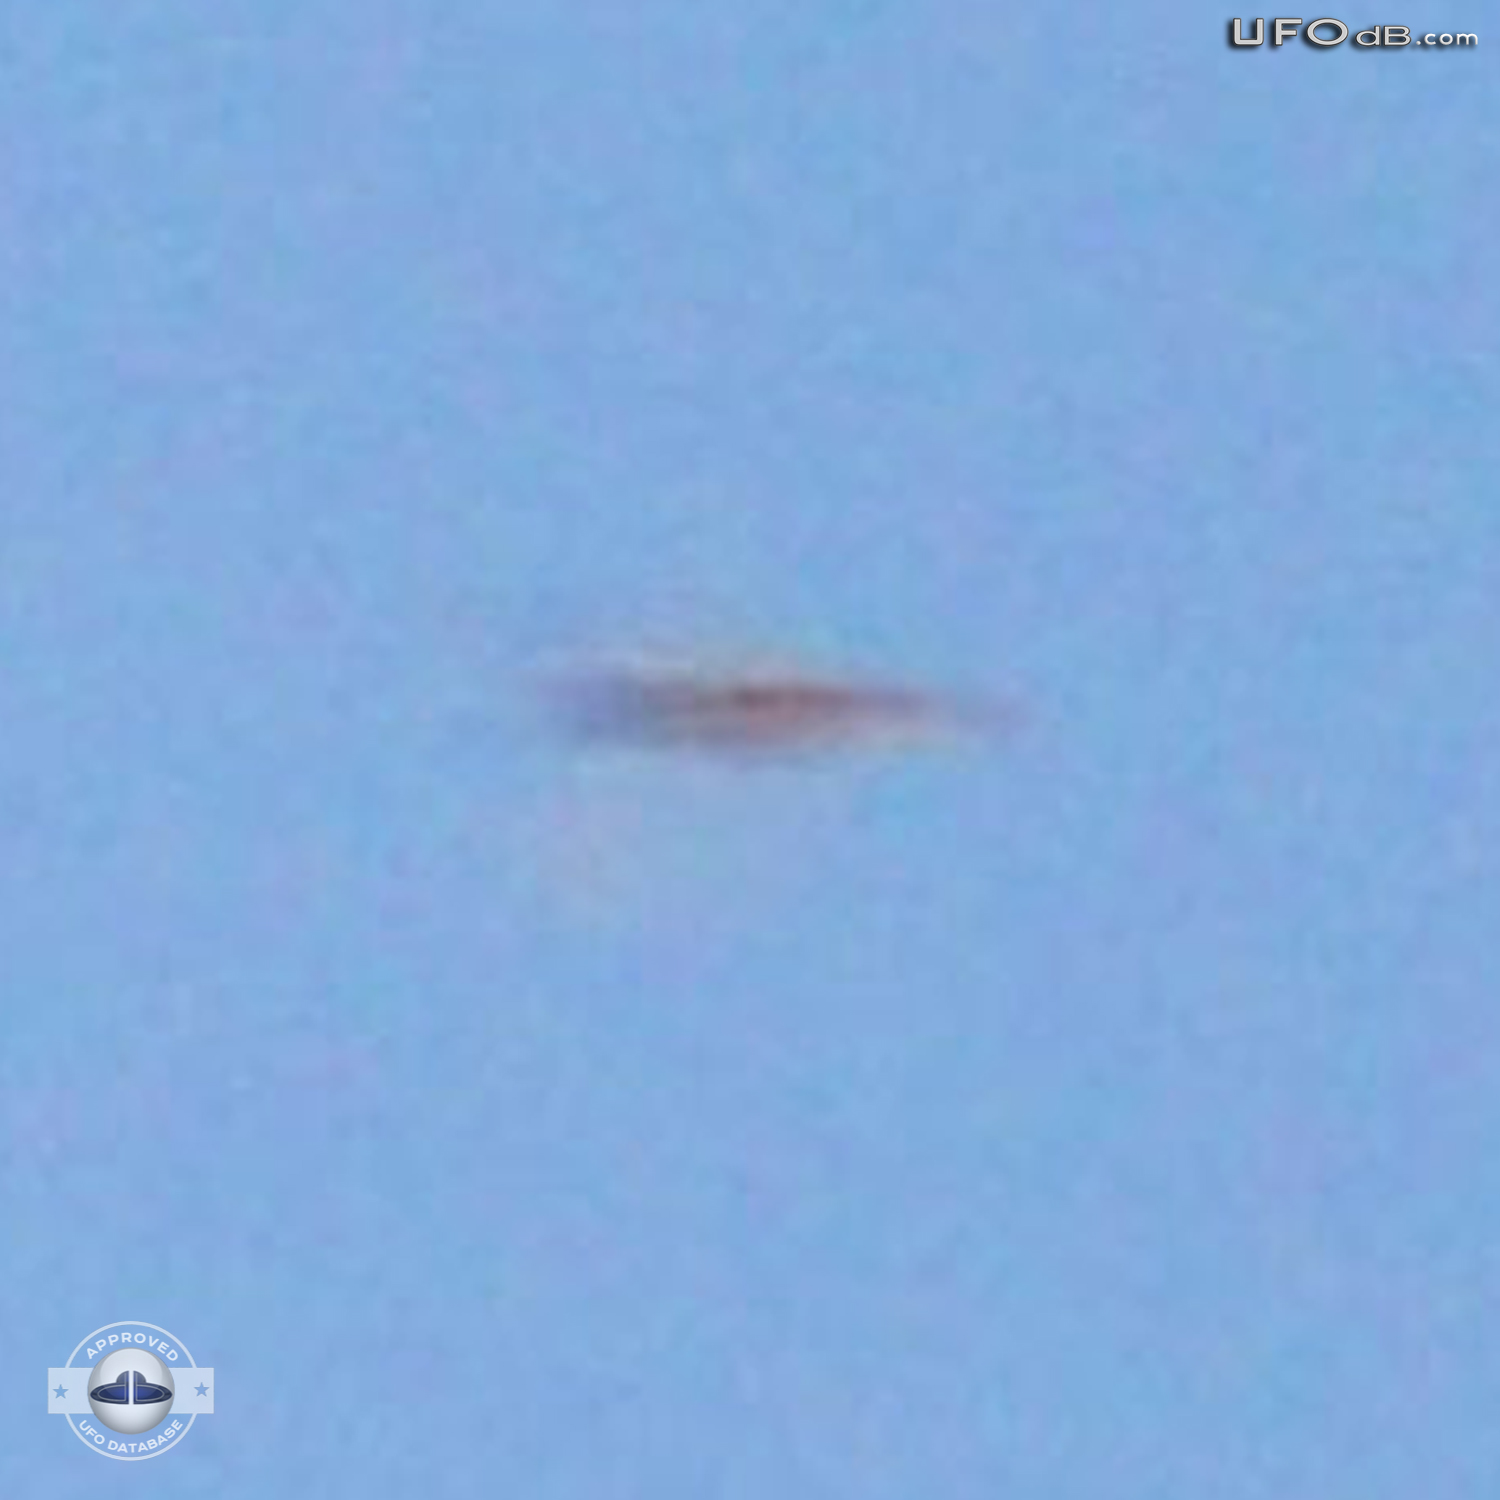 Photo Contest shot capture a passing UFO in Uruguay | May 18 2011 UFO Picture #329-4